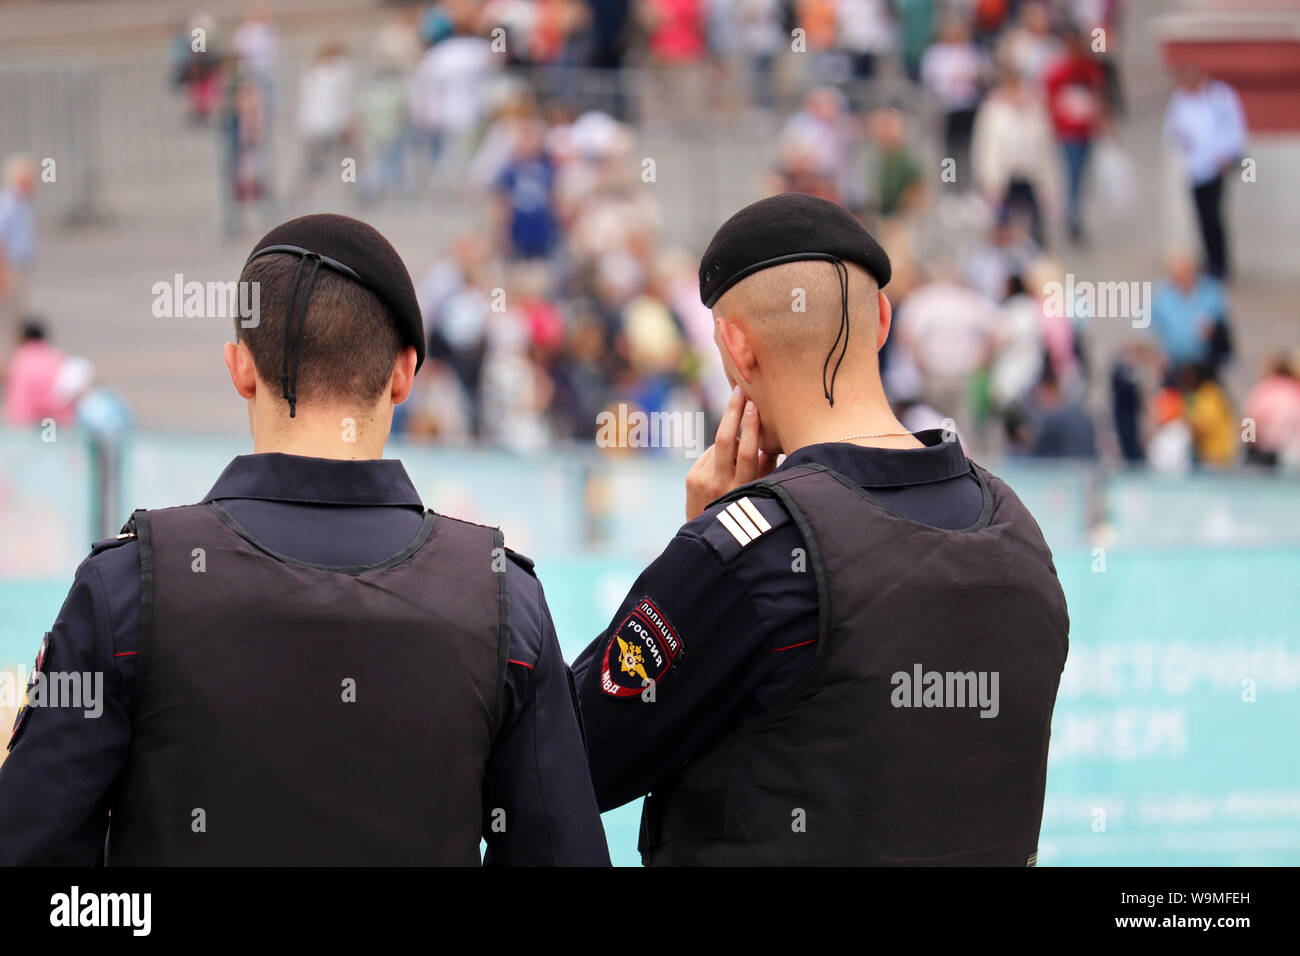 Two russian police officers stand on background of a crowd of people, street patrol. Law enforcement agencies, concept of law and order Stock Photo